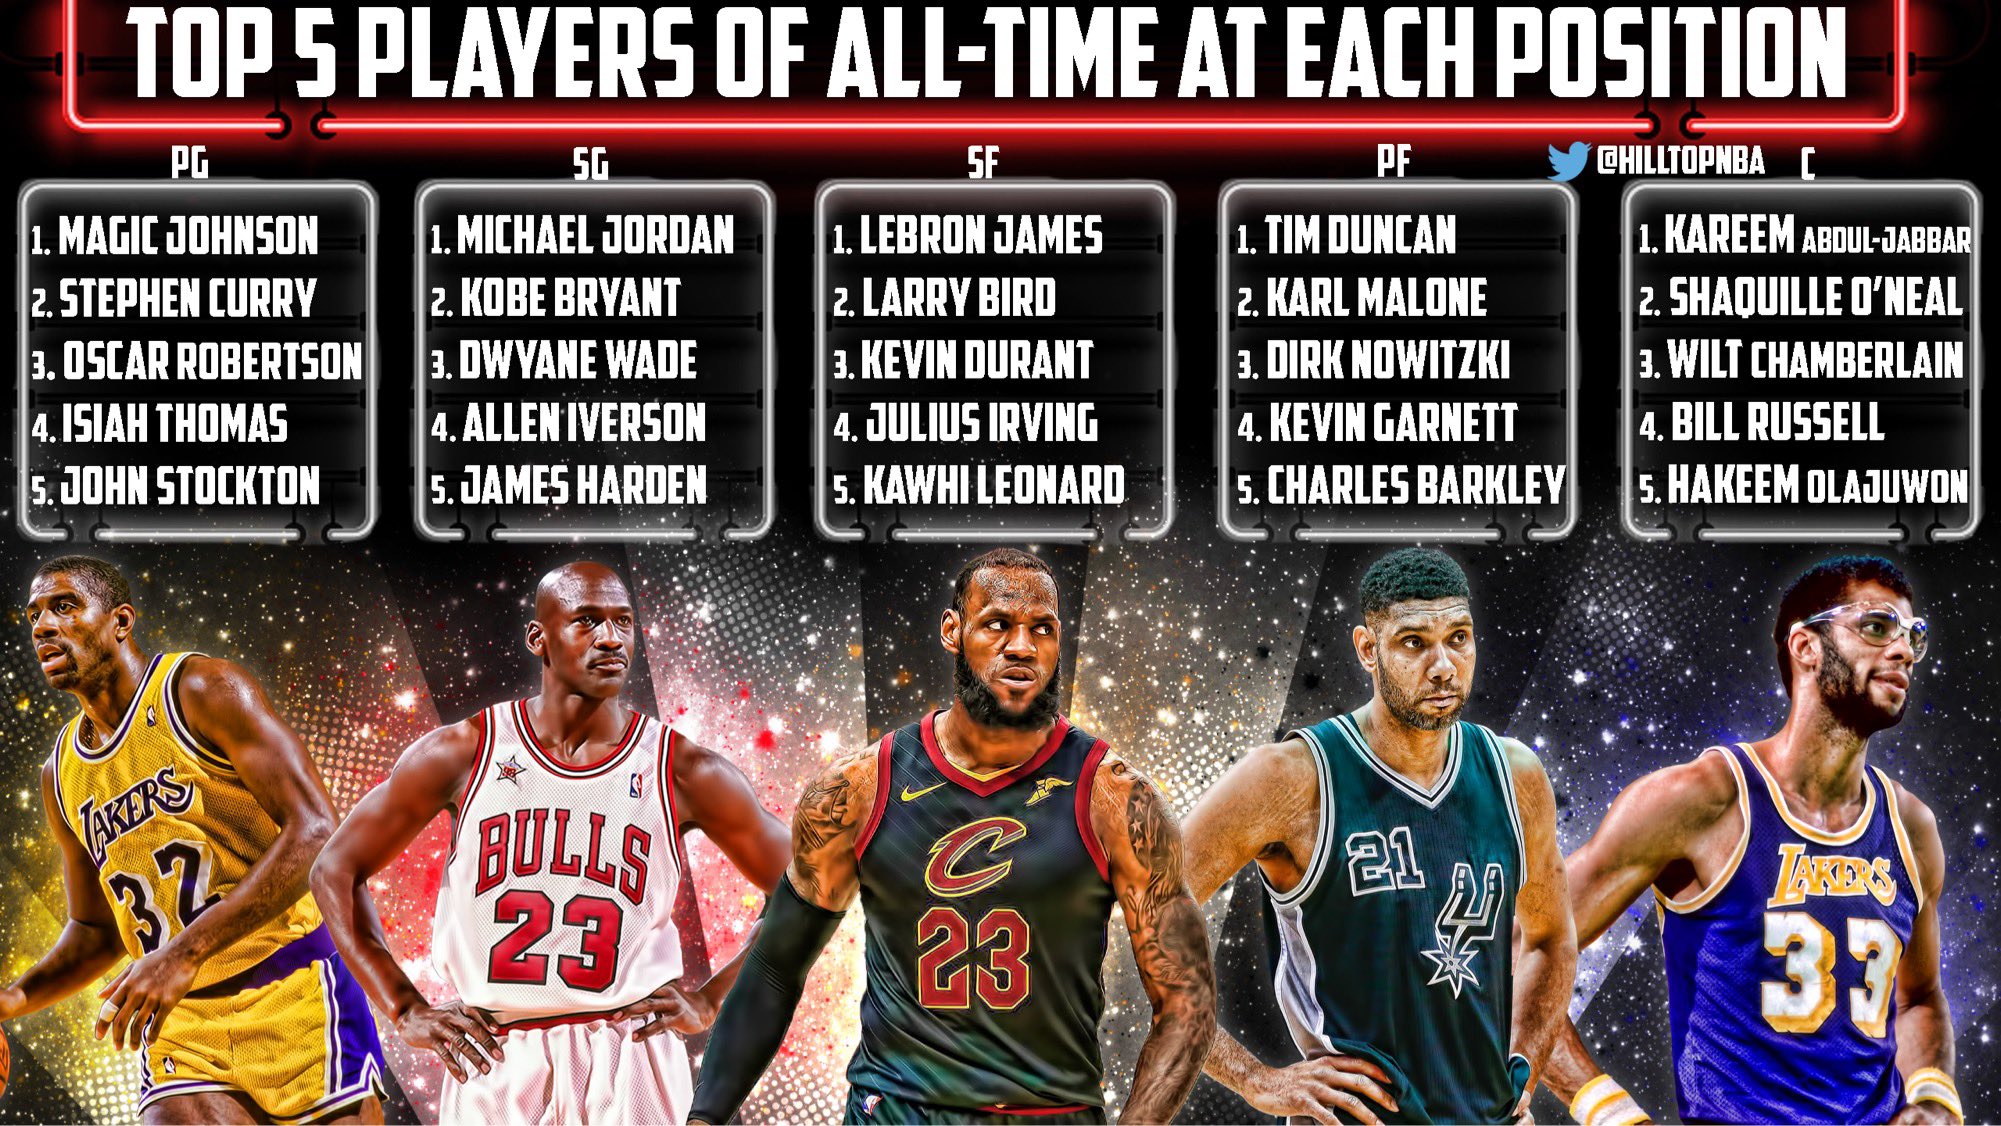 Hilltop Hoops on Twitter: "Ranking the Top 5 NBA Players of All-Time at  each position 🔥🏀 Thoughts?👇🏼 #NBATwitter https://t.co/5hKexFiUvO" /  Twitter